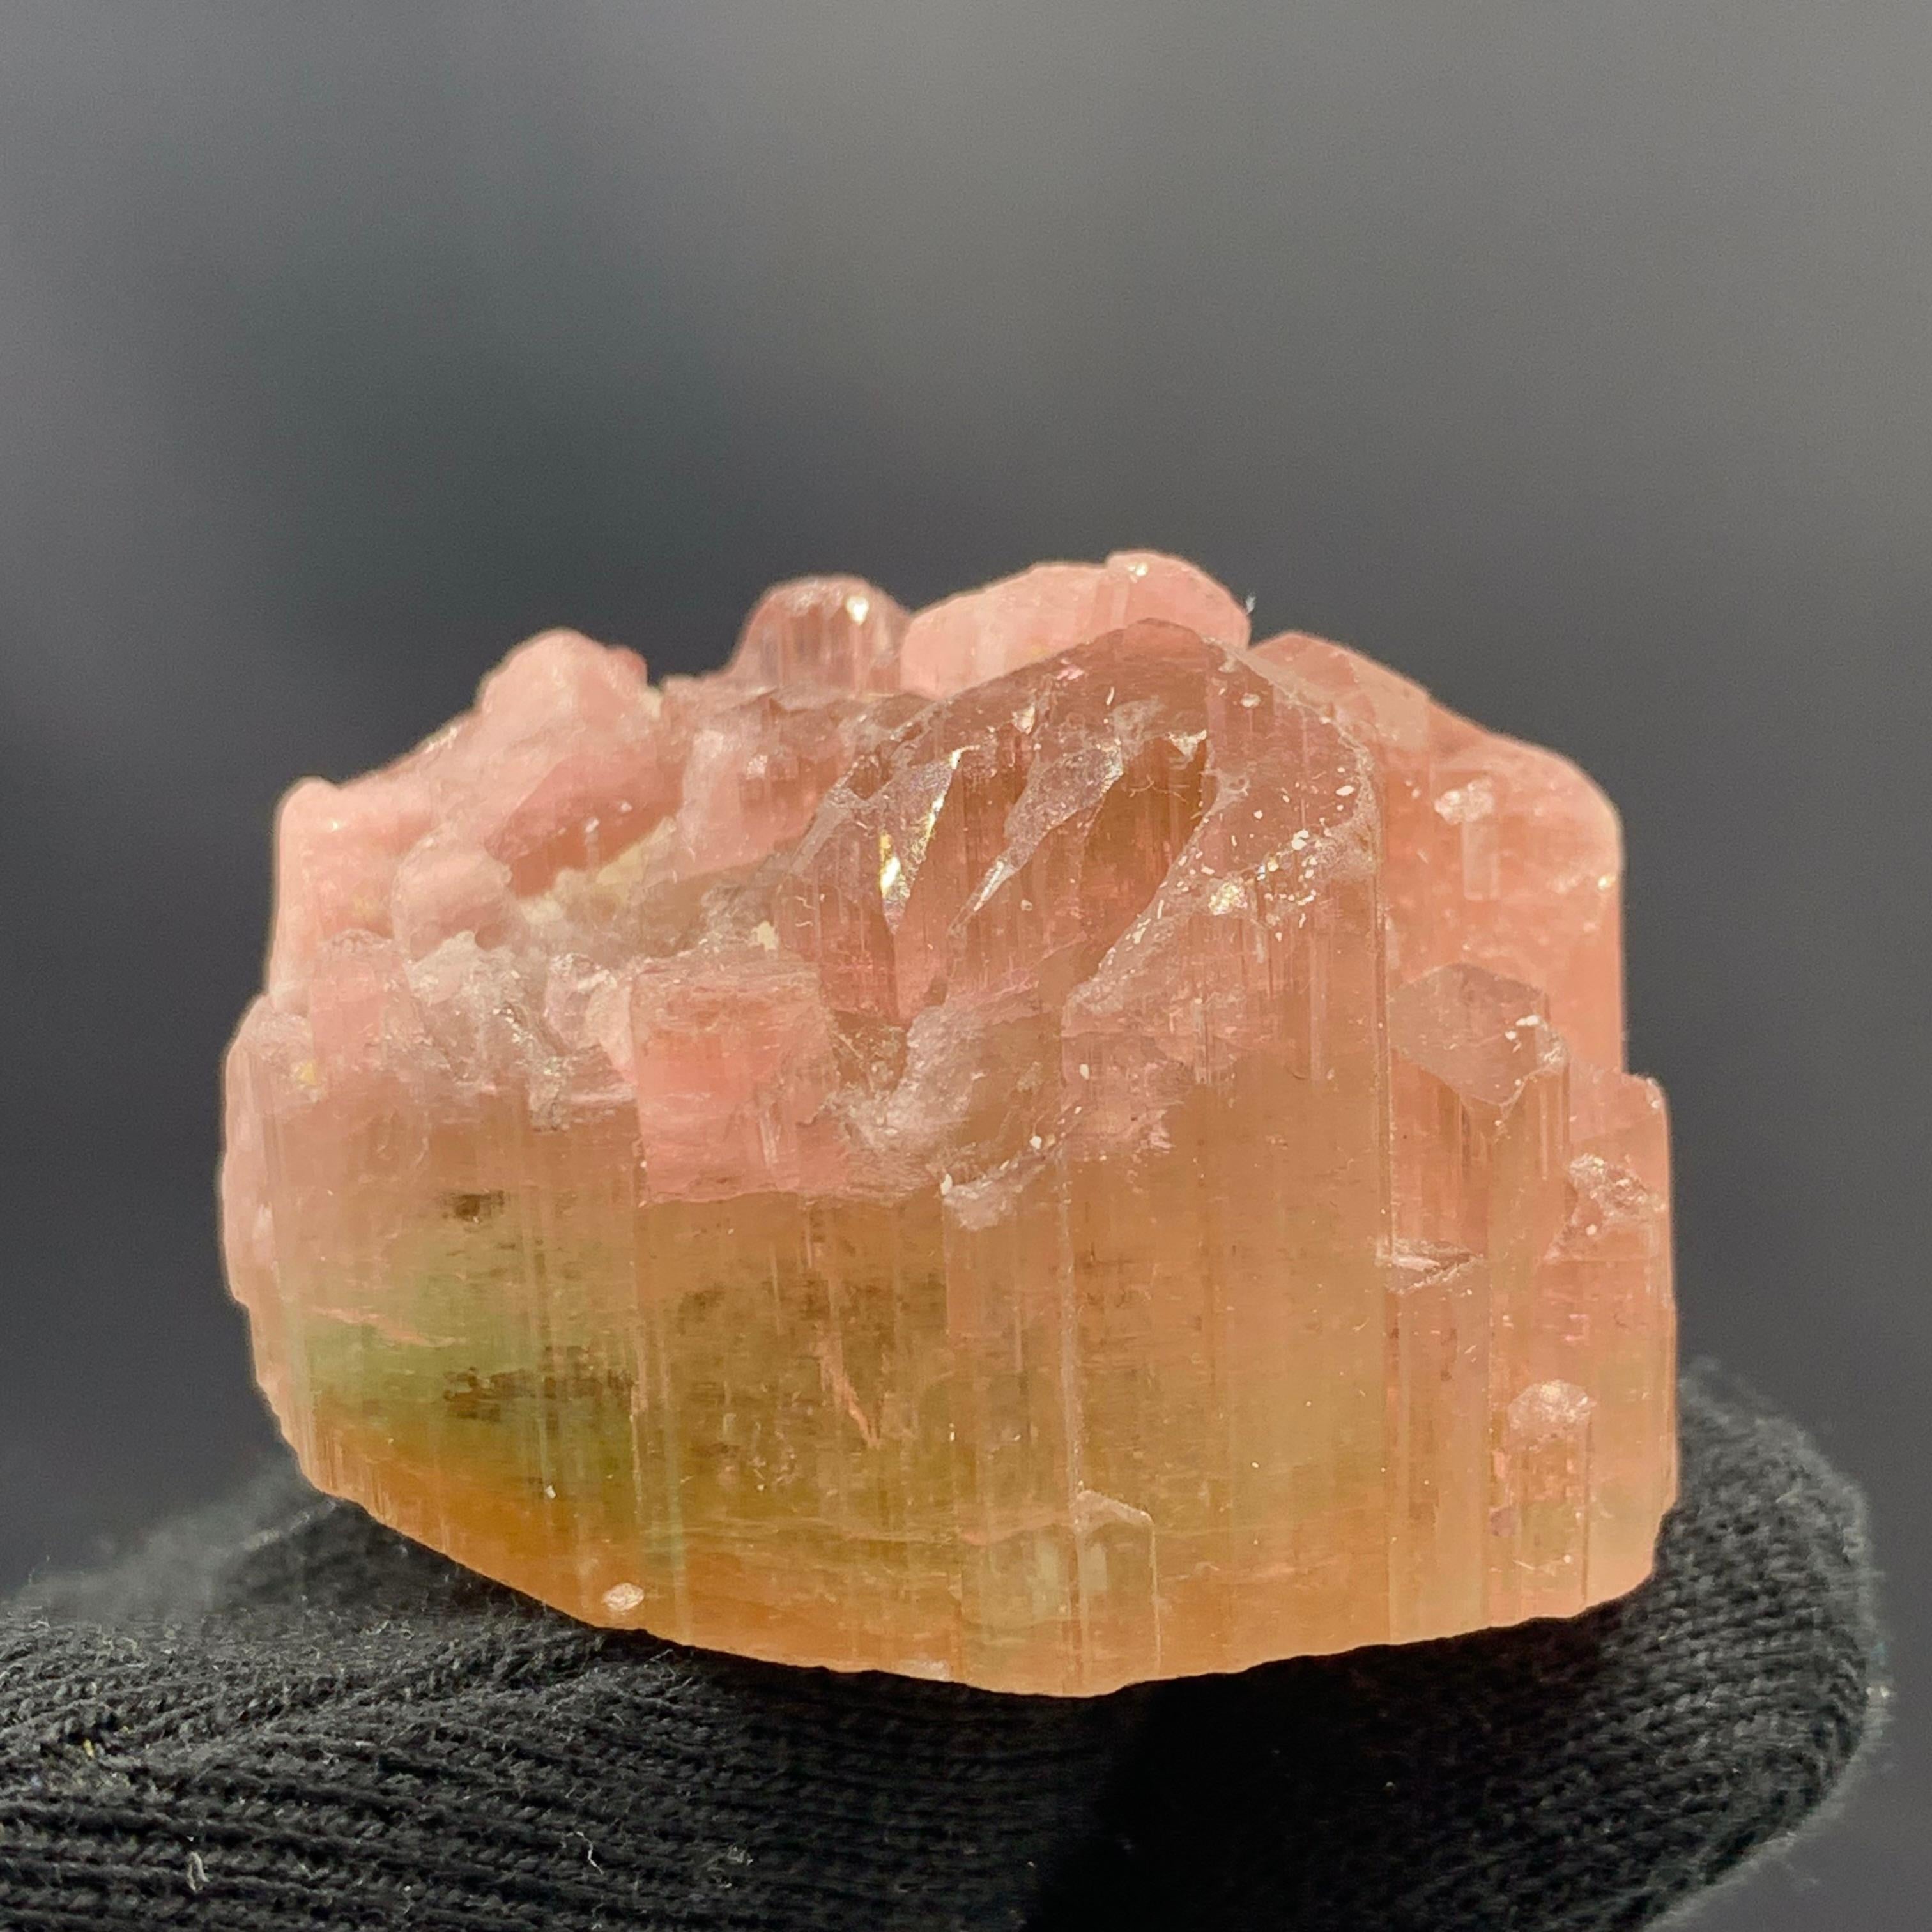 71.95 Gram Beautiful Tri Color Tourmaline Crystal From Paprook Mine Afghanistan 

Weight: 71.95 Gram
Dimension: 2.9 x 4.3 x 3.5 Cm
Origin: Paprook Mine, Afghanistan 

Tourmaline is a crystalline silicate mineral group in which boron is compounded